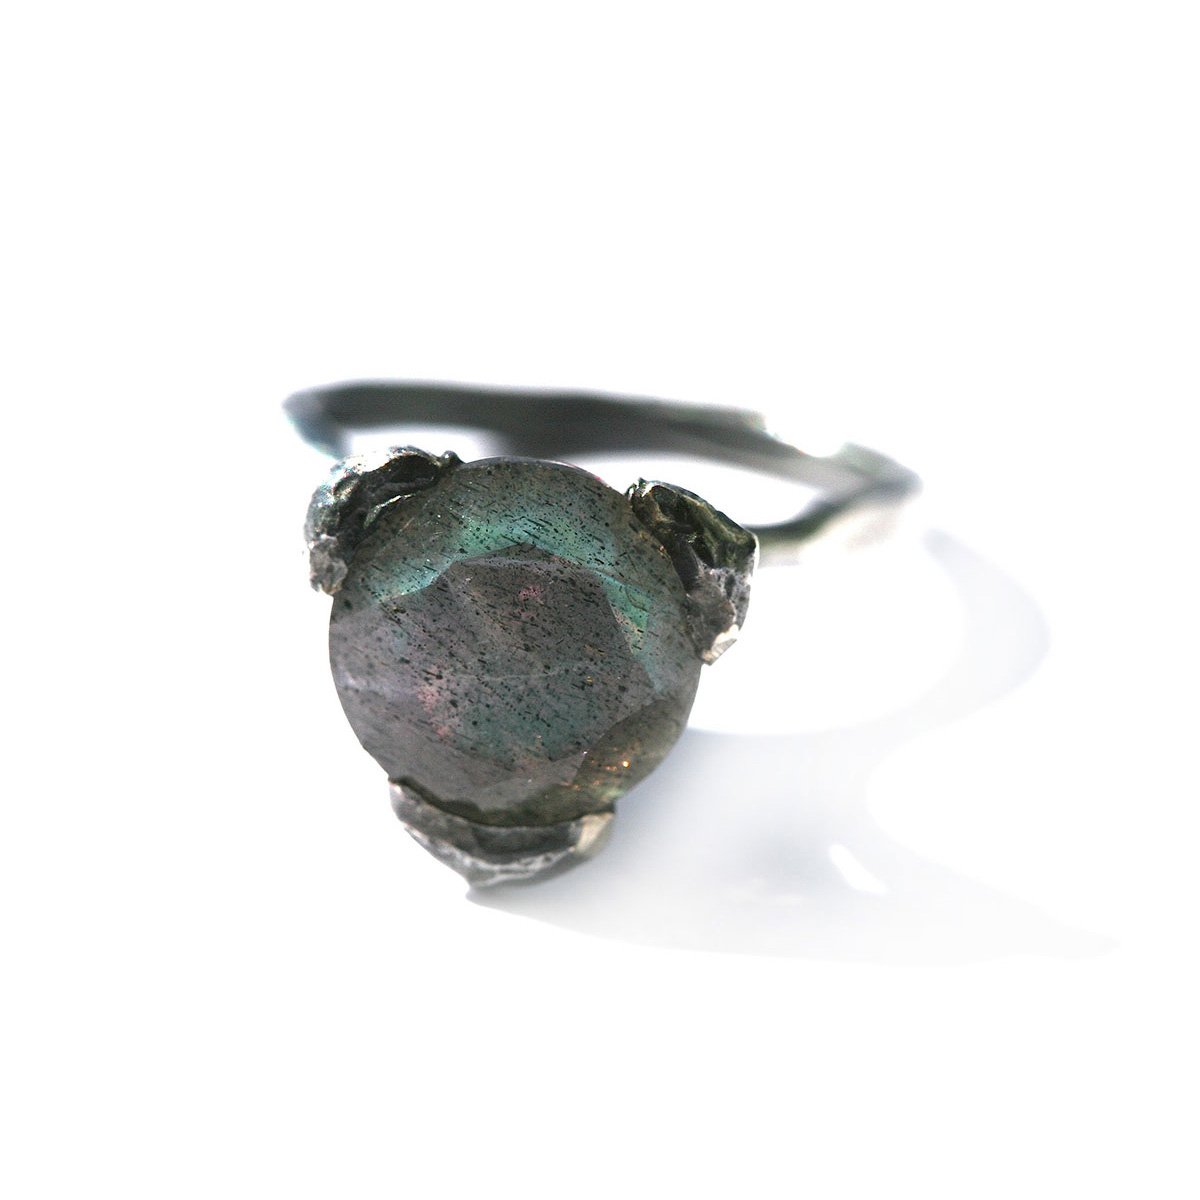 The cone ring - Oxidized Silver with natural Labradorite